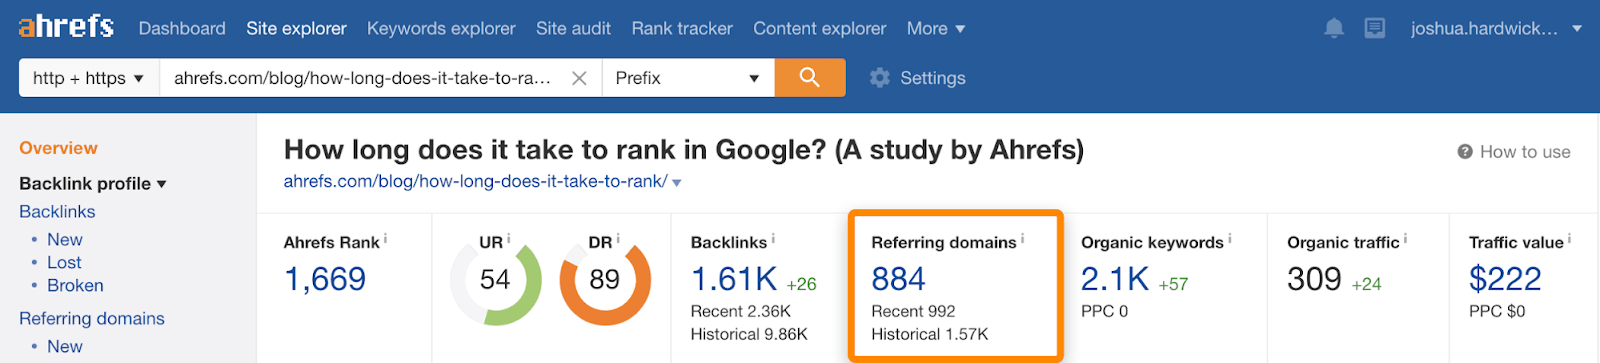 8 ranking in google study referring domains